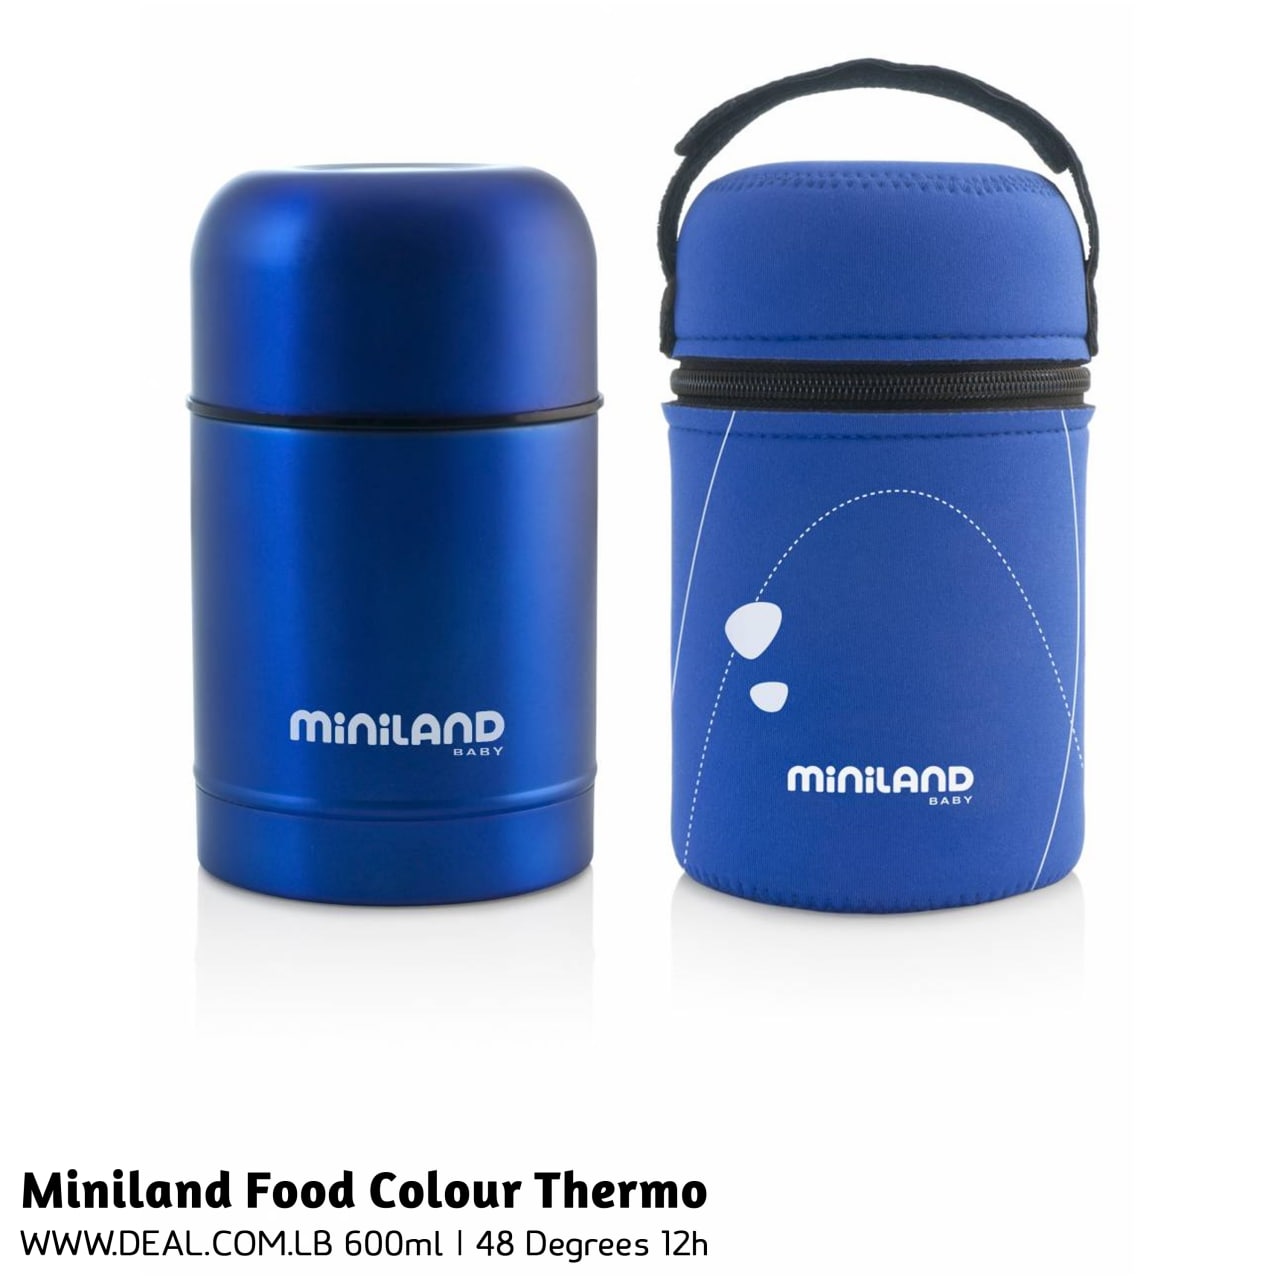 Miniland Food Color Thermo Navy